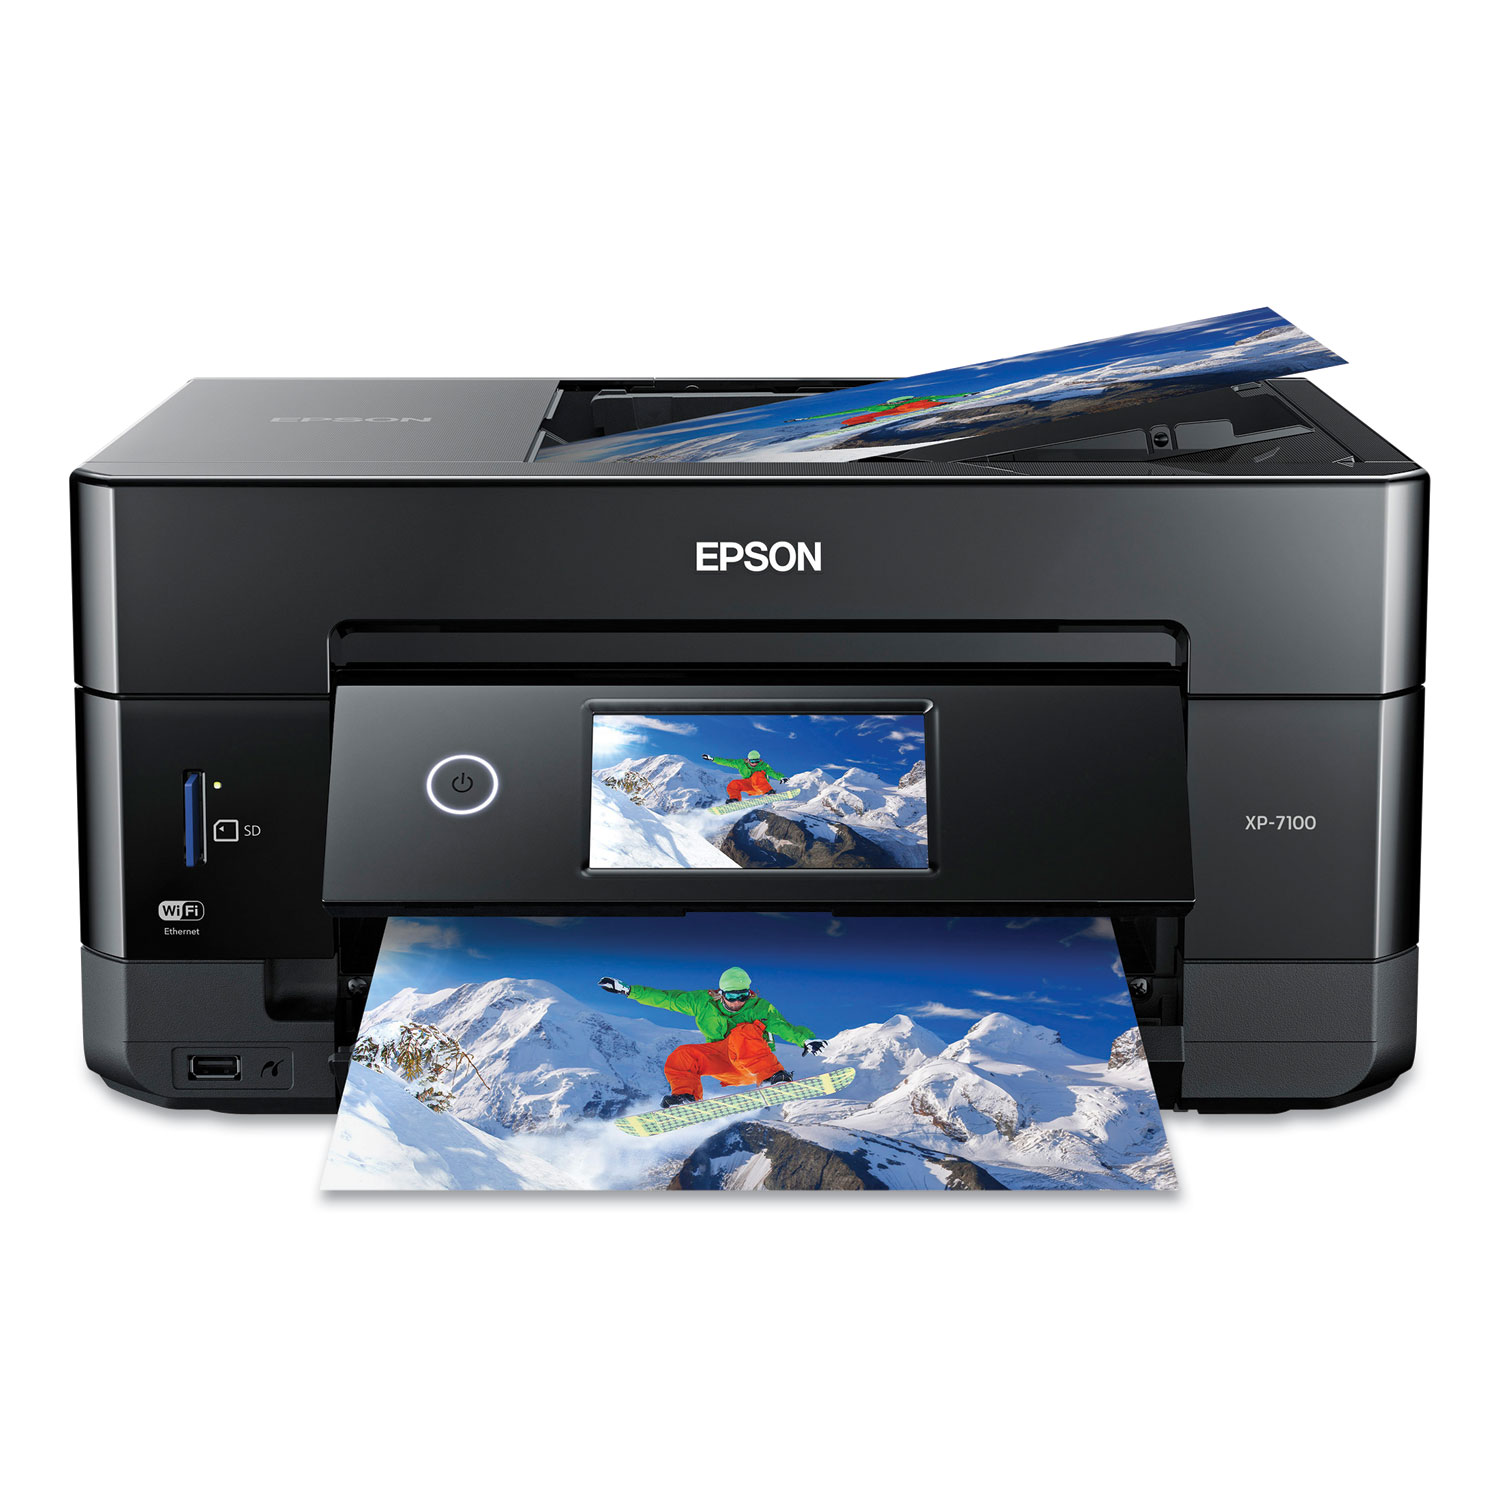  Epson C11CH03201 Expression Premium XP-7100 Small-in-One Printer, Copy/Print/Scan (EPSC11CH03201) 